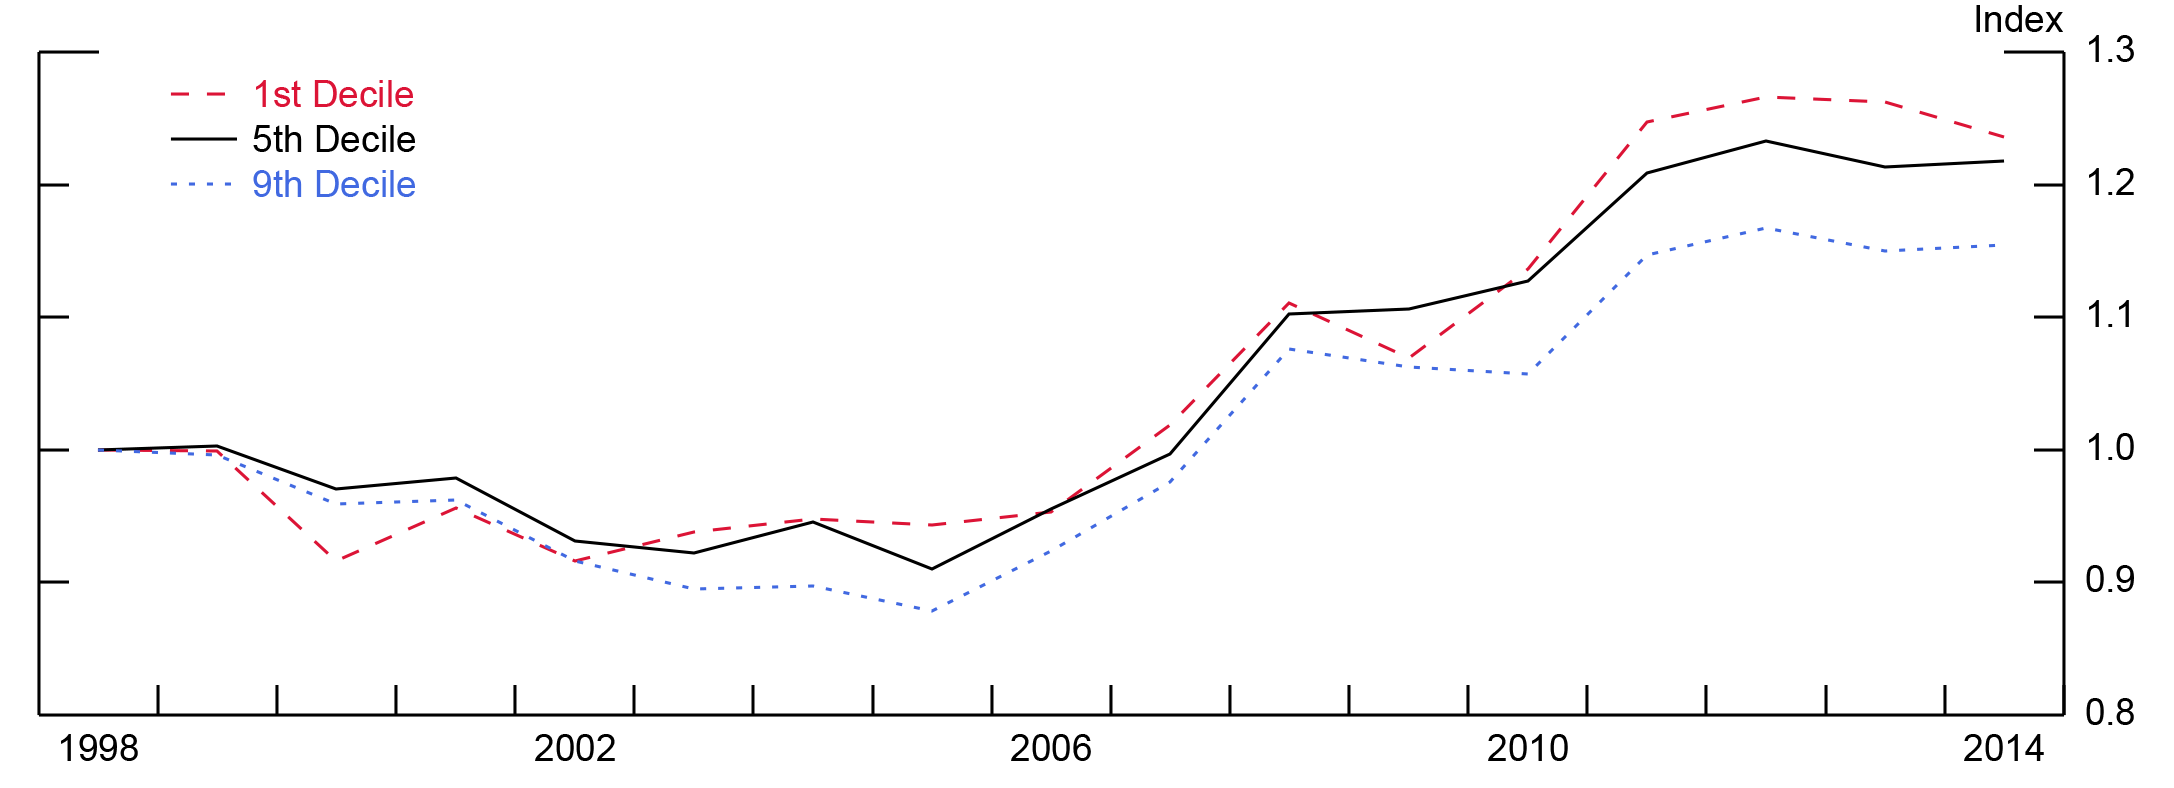 Figure 4: Import Price Indexes by Income Decile. See accessible link for data.